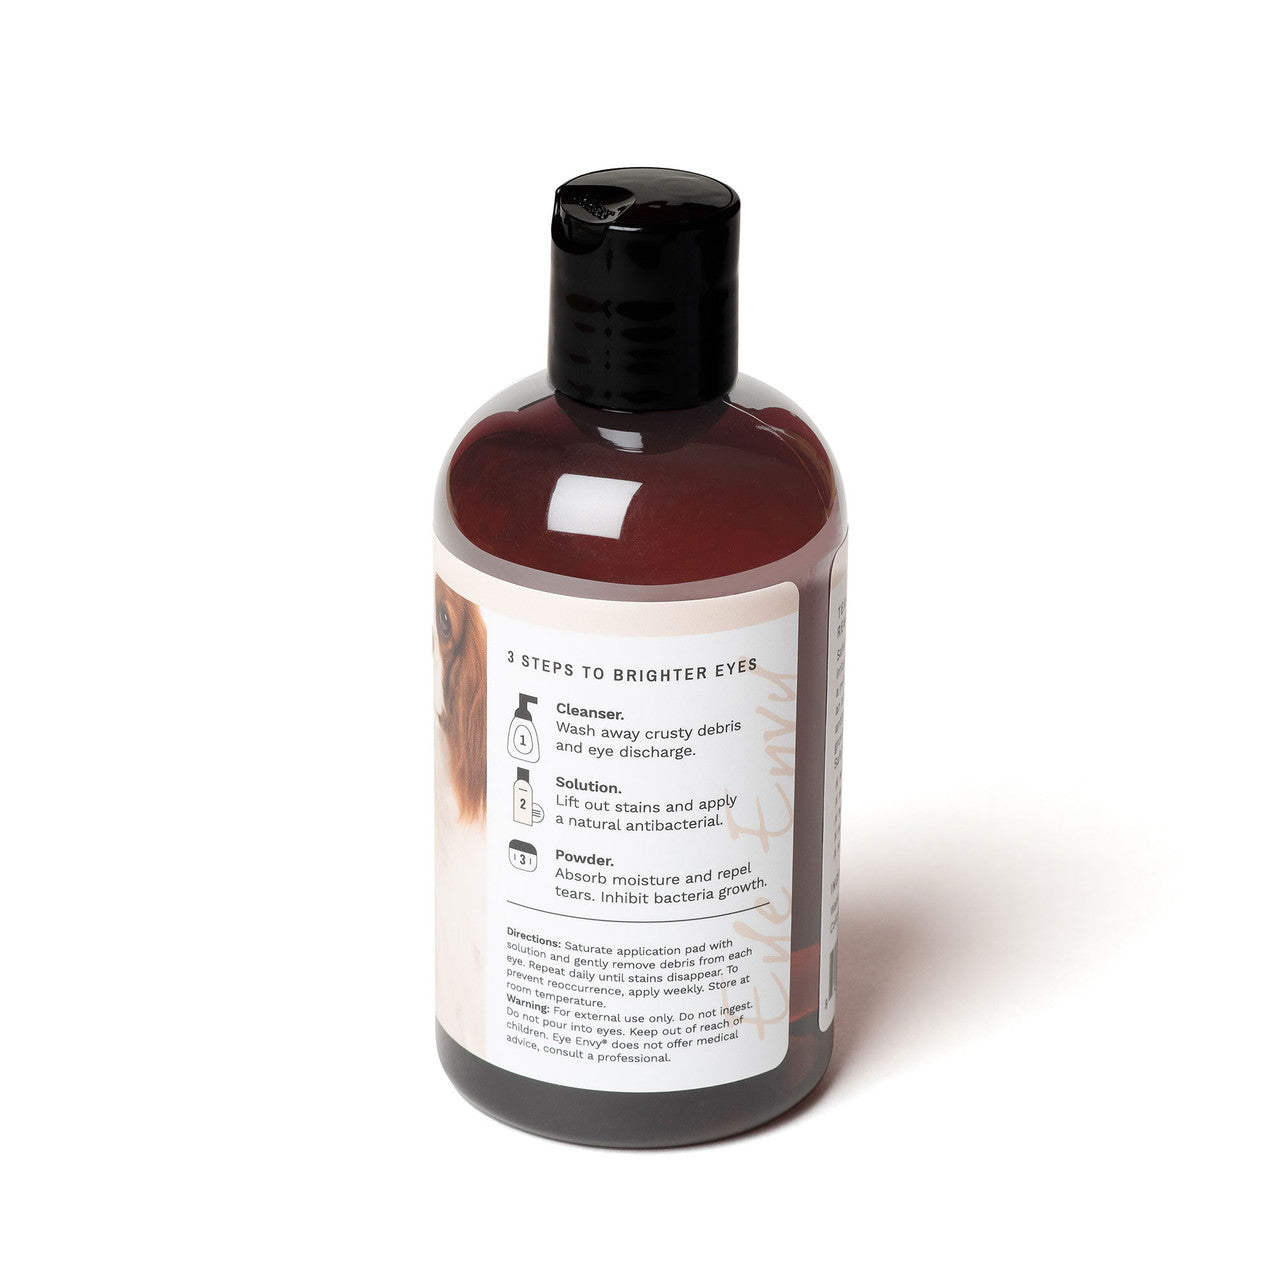 Tear Stain Remover Solution for Dogs (118ml)